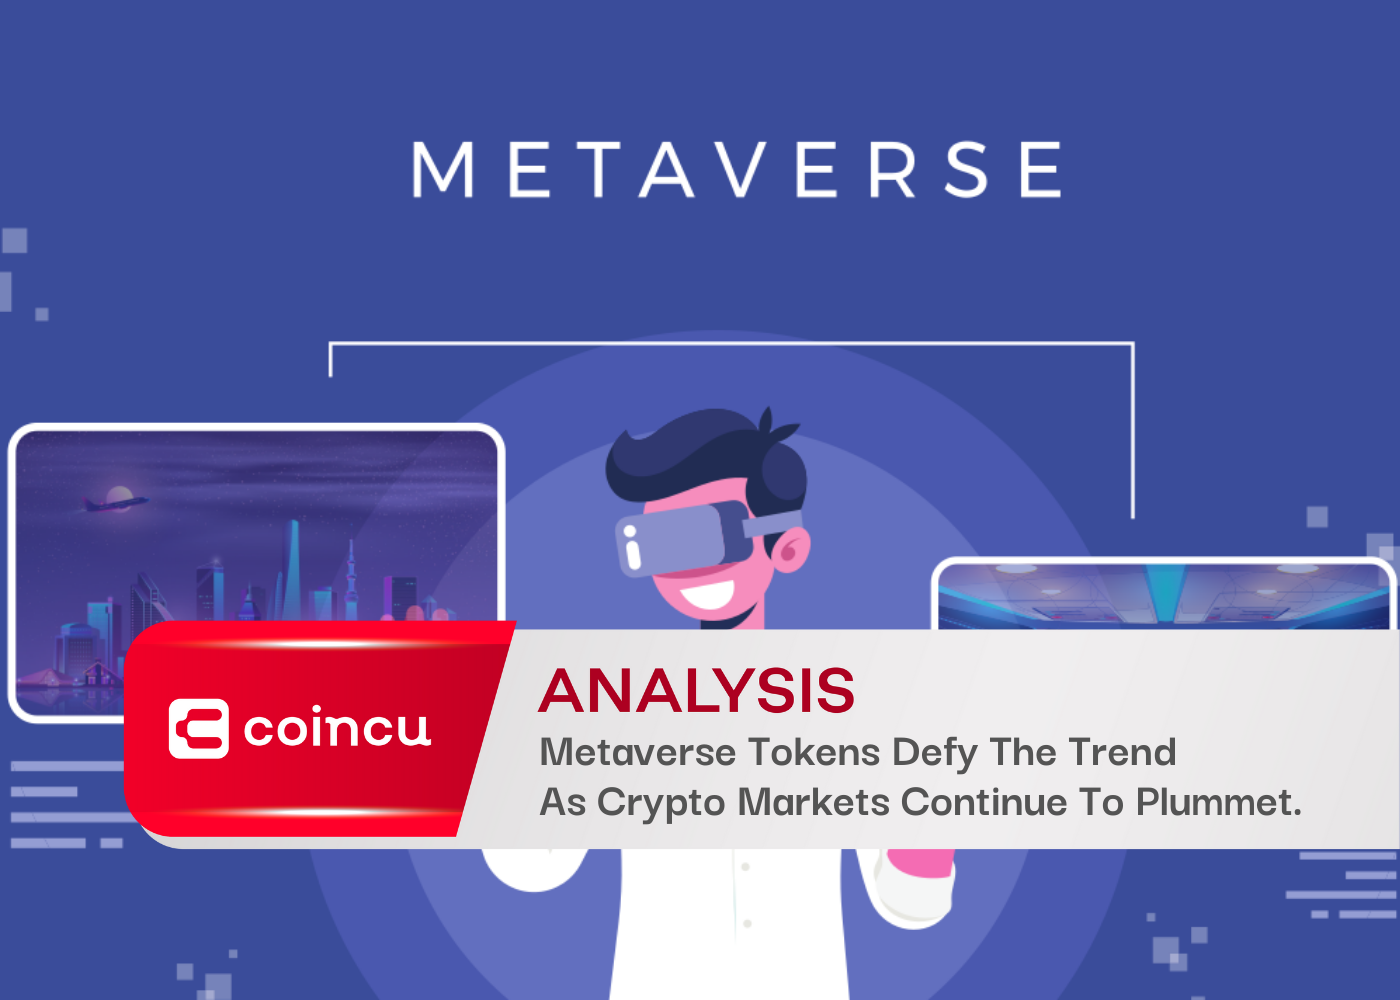 Metaverse Tokens Defy The Trend As Cryptocurrency Markets Continue To Plummet.